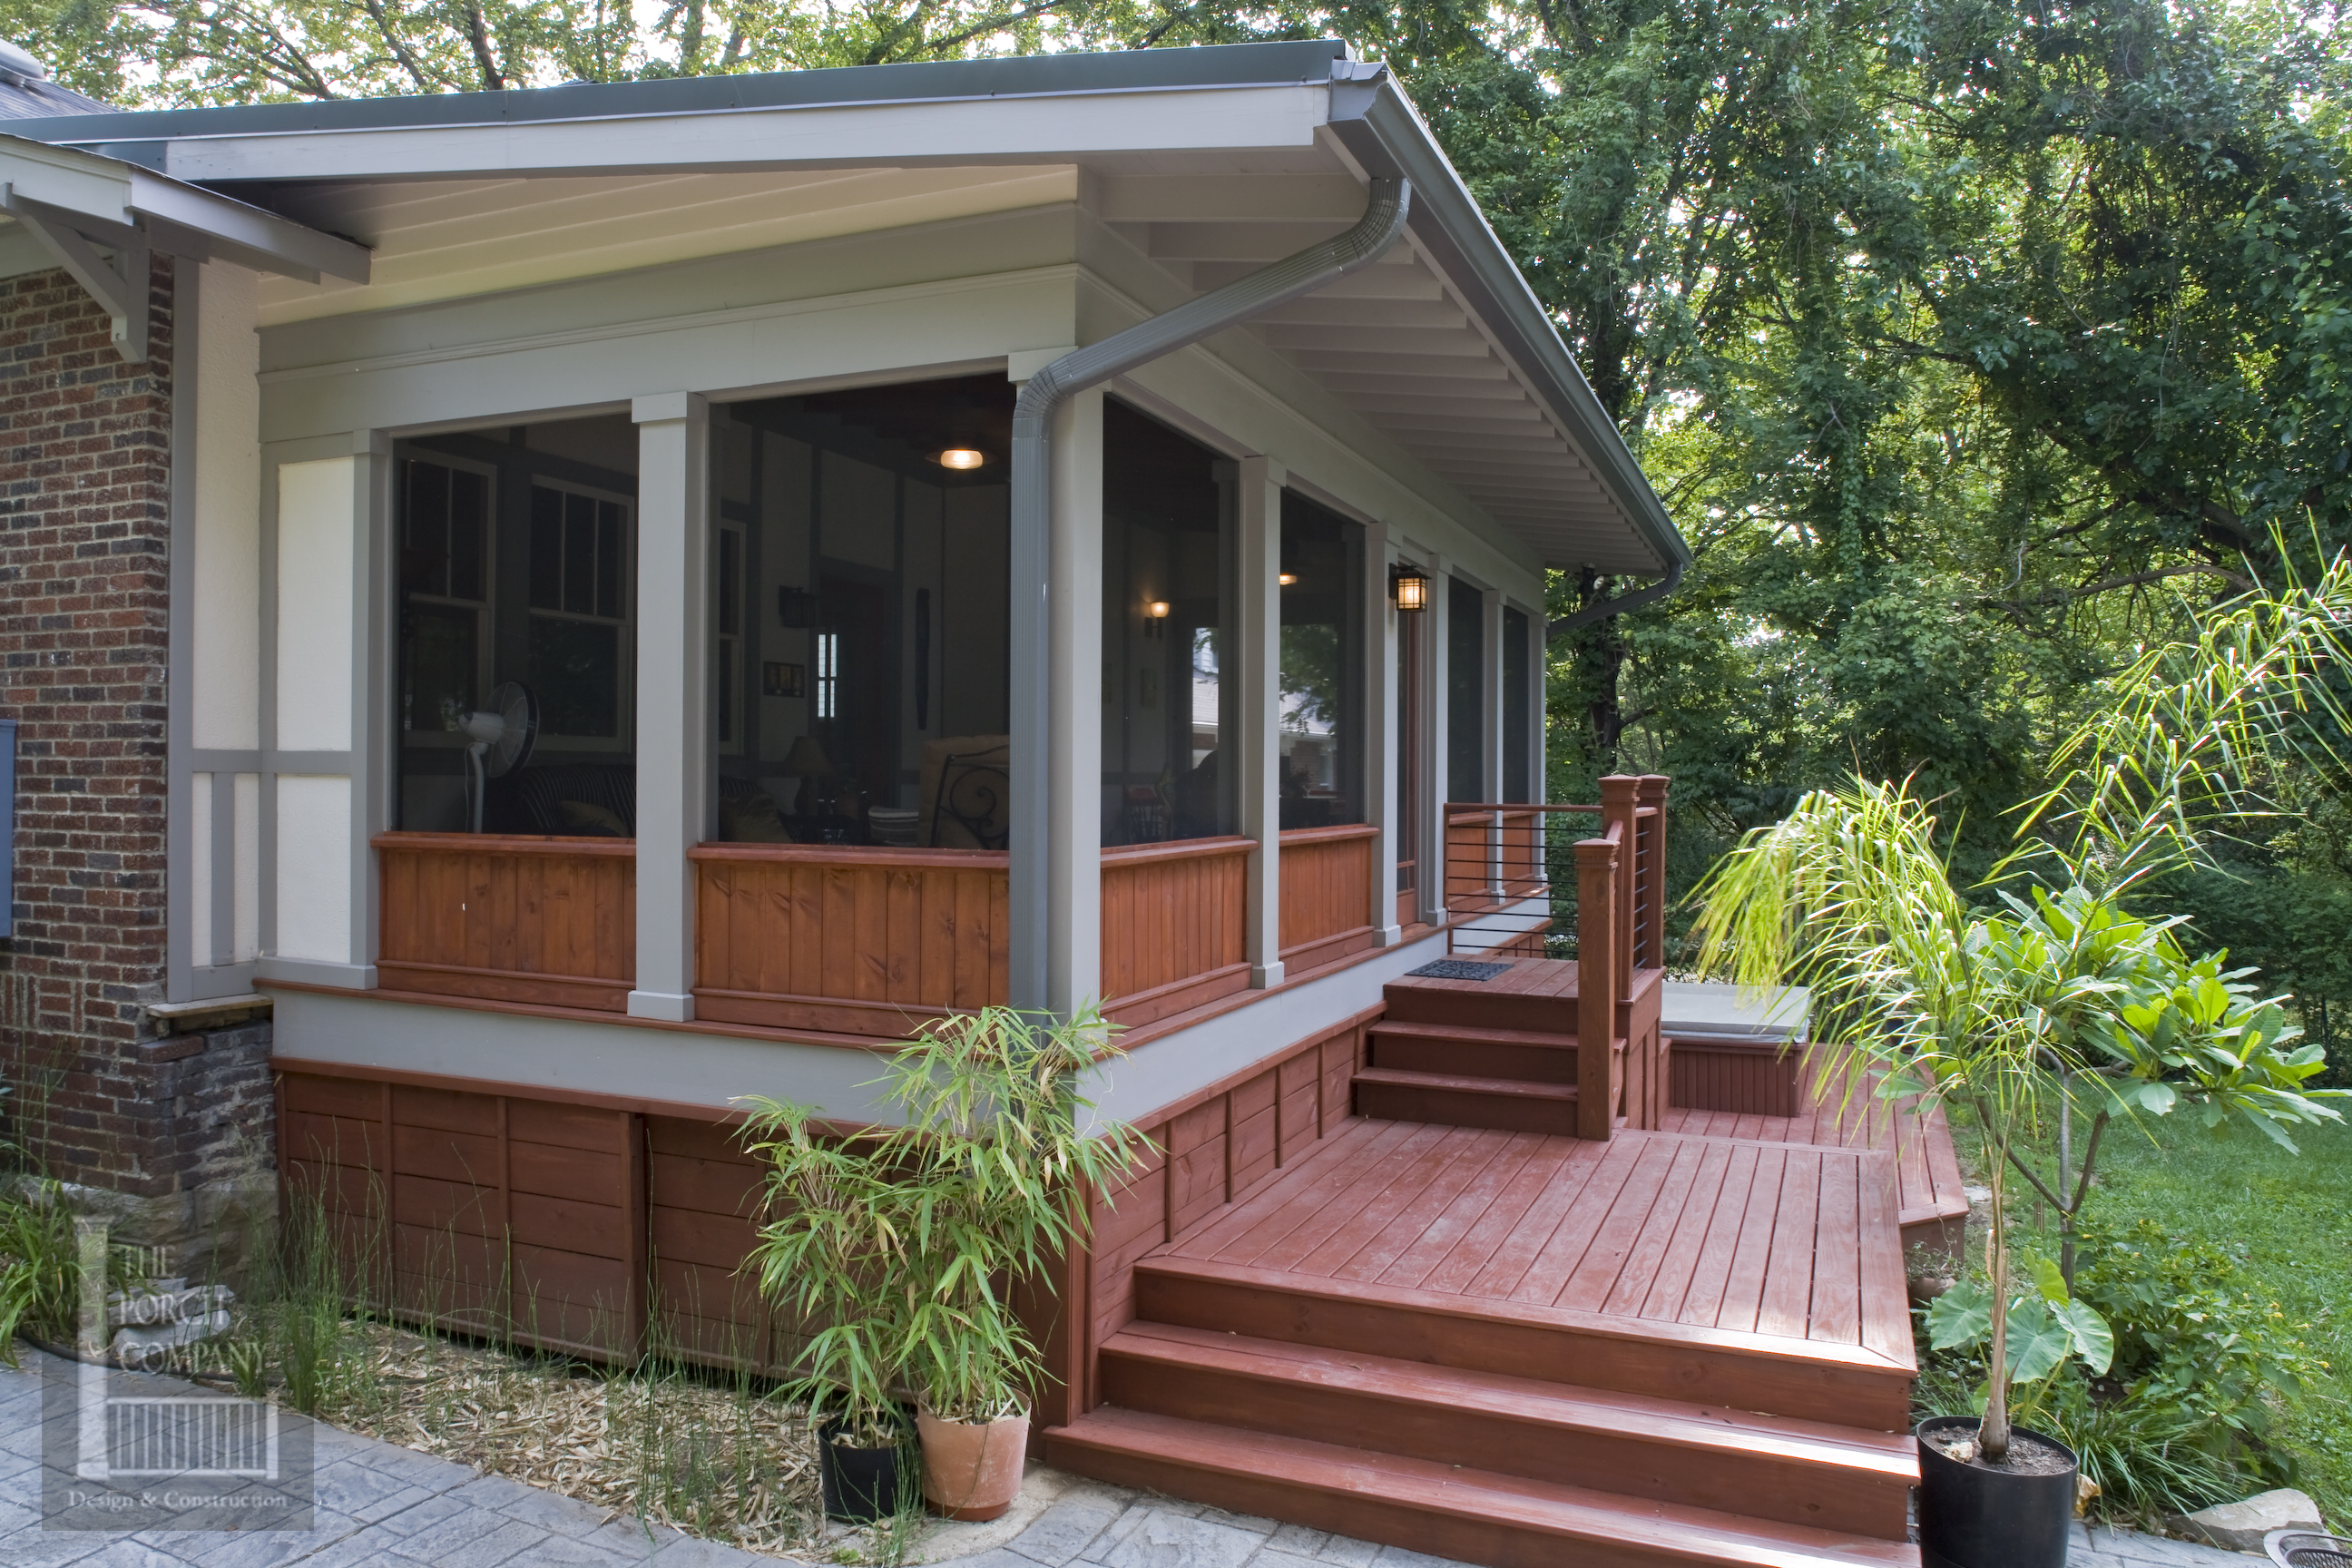  the right porch roof style - The Porch CompanyThe Porch Company